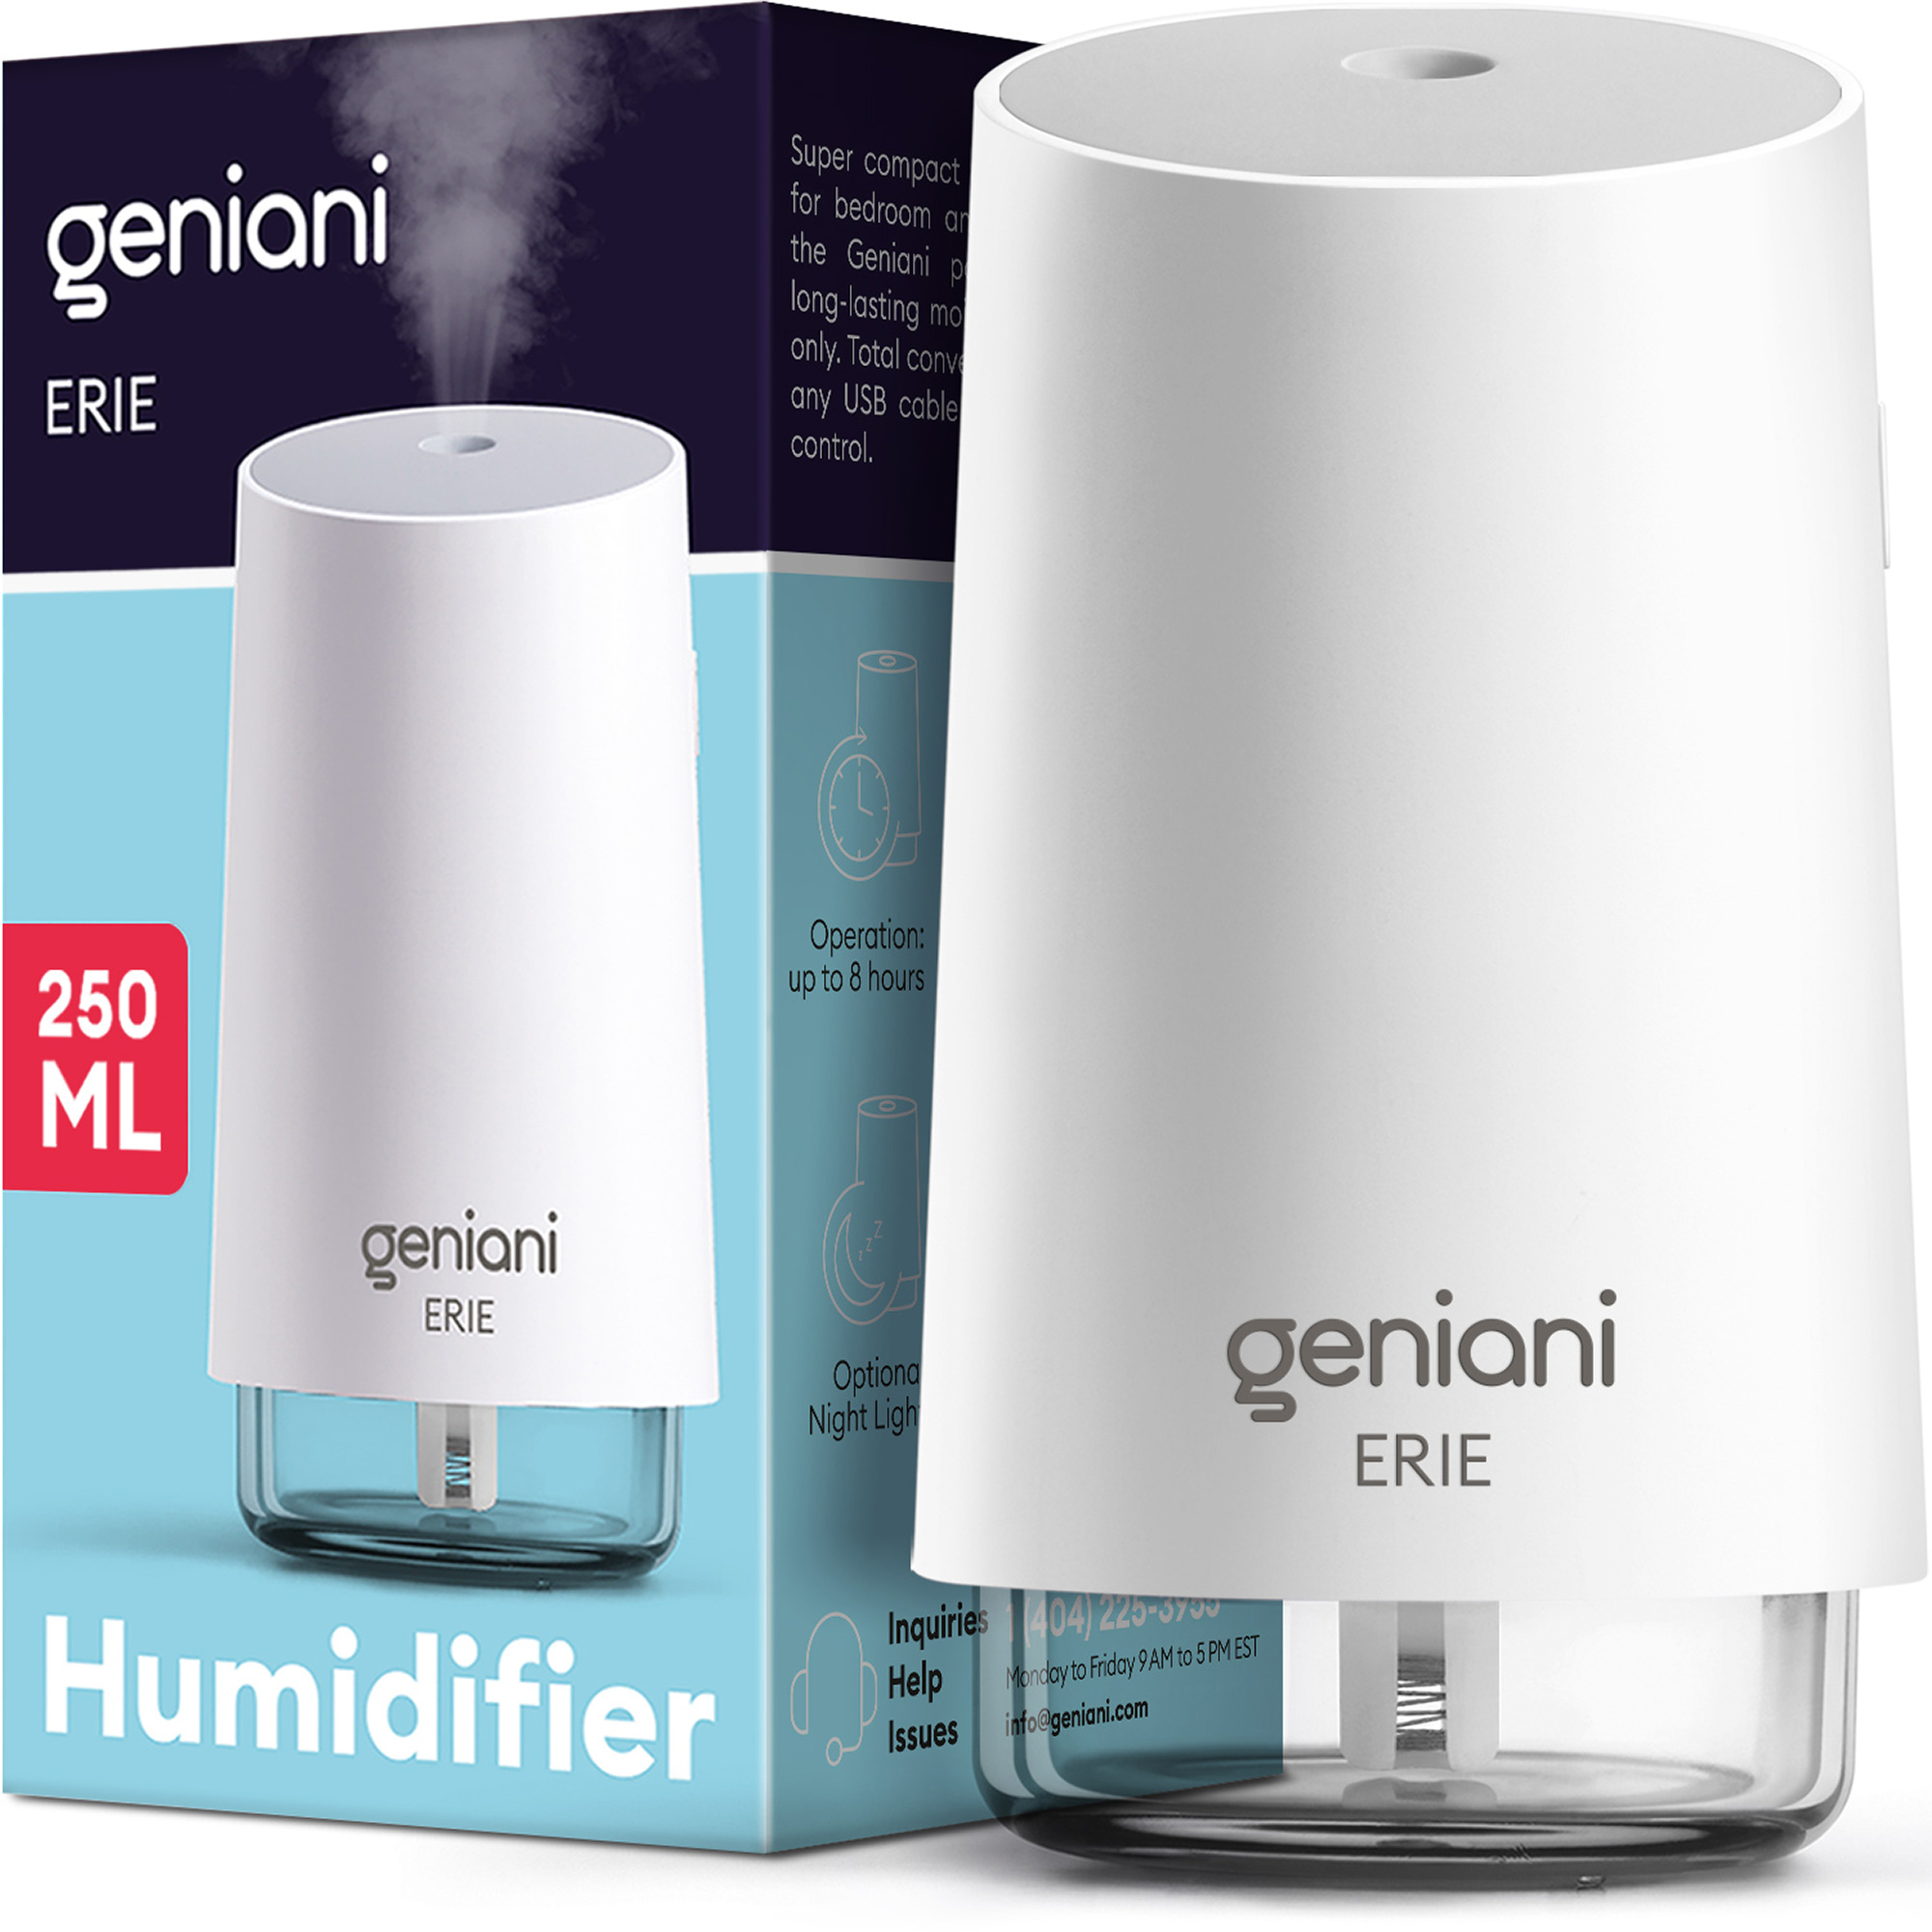 Geniani Cool Mist Mini Humidifier for Bedroom, Plants, Office, Car & Baby Room - USB Desktop Humidifier with Auto Shut Off - Quiet Portable Small Humidifier - image 1 of 6